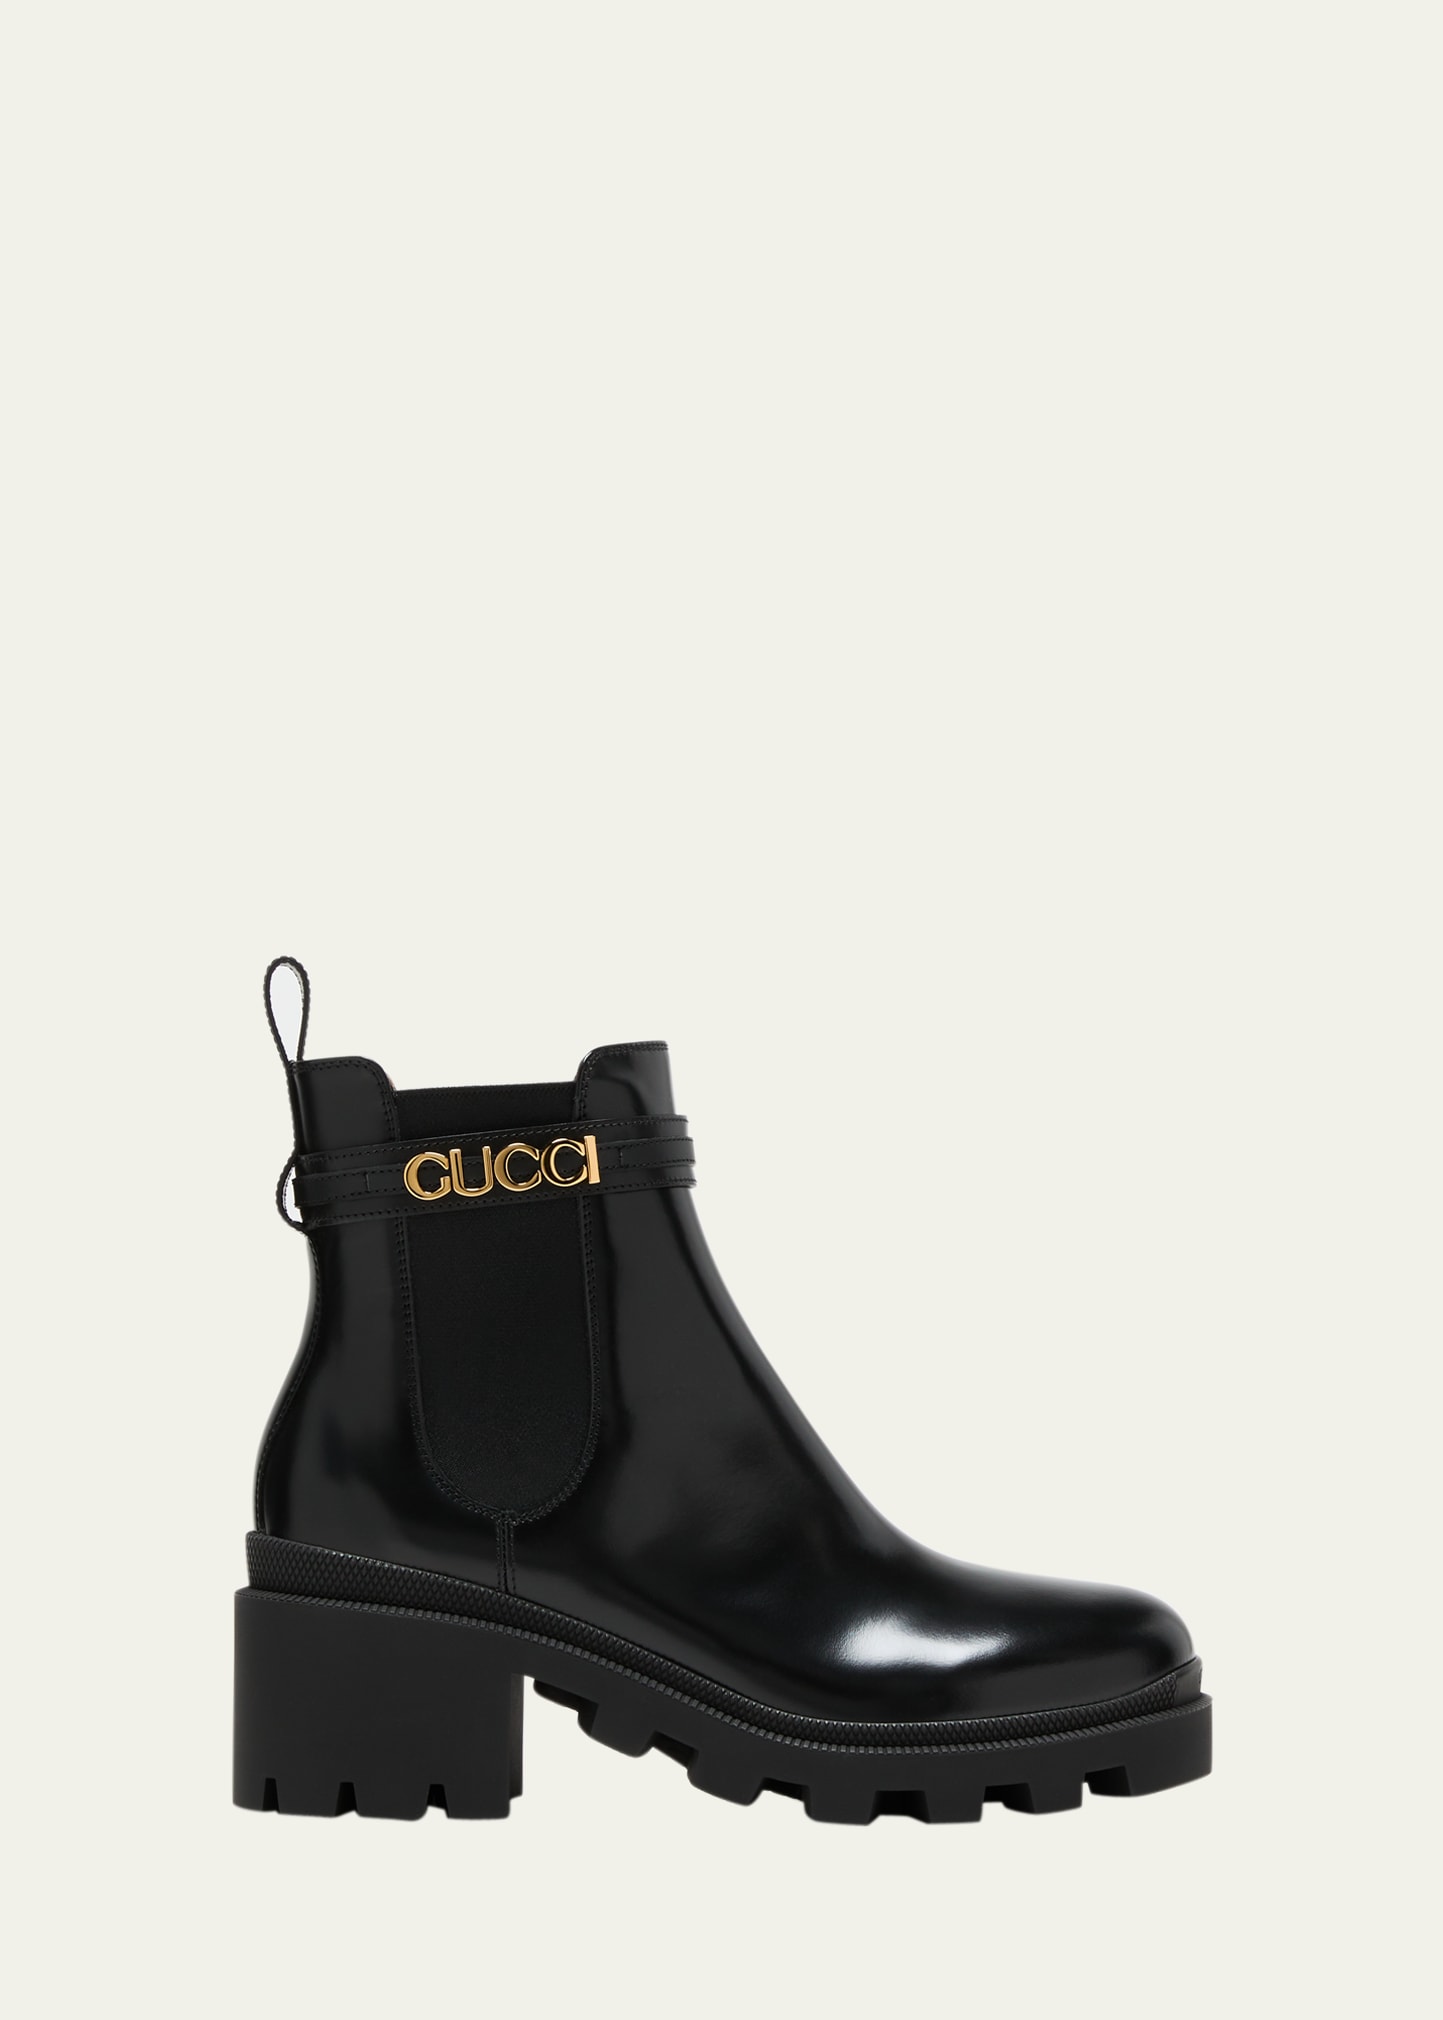 GUCCI TRIP LEATHER LOGO-STRAP CHELSEA BOOTS